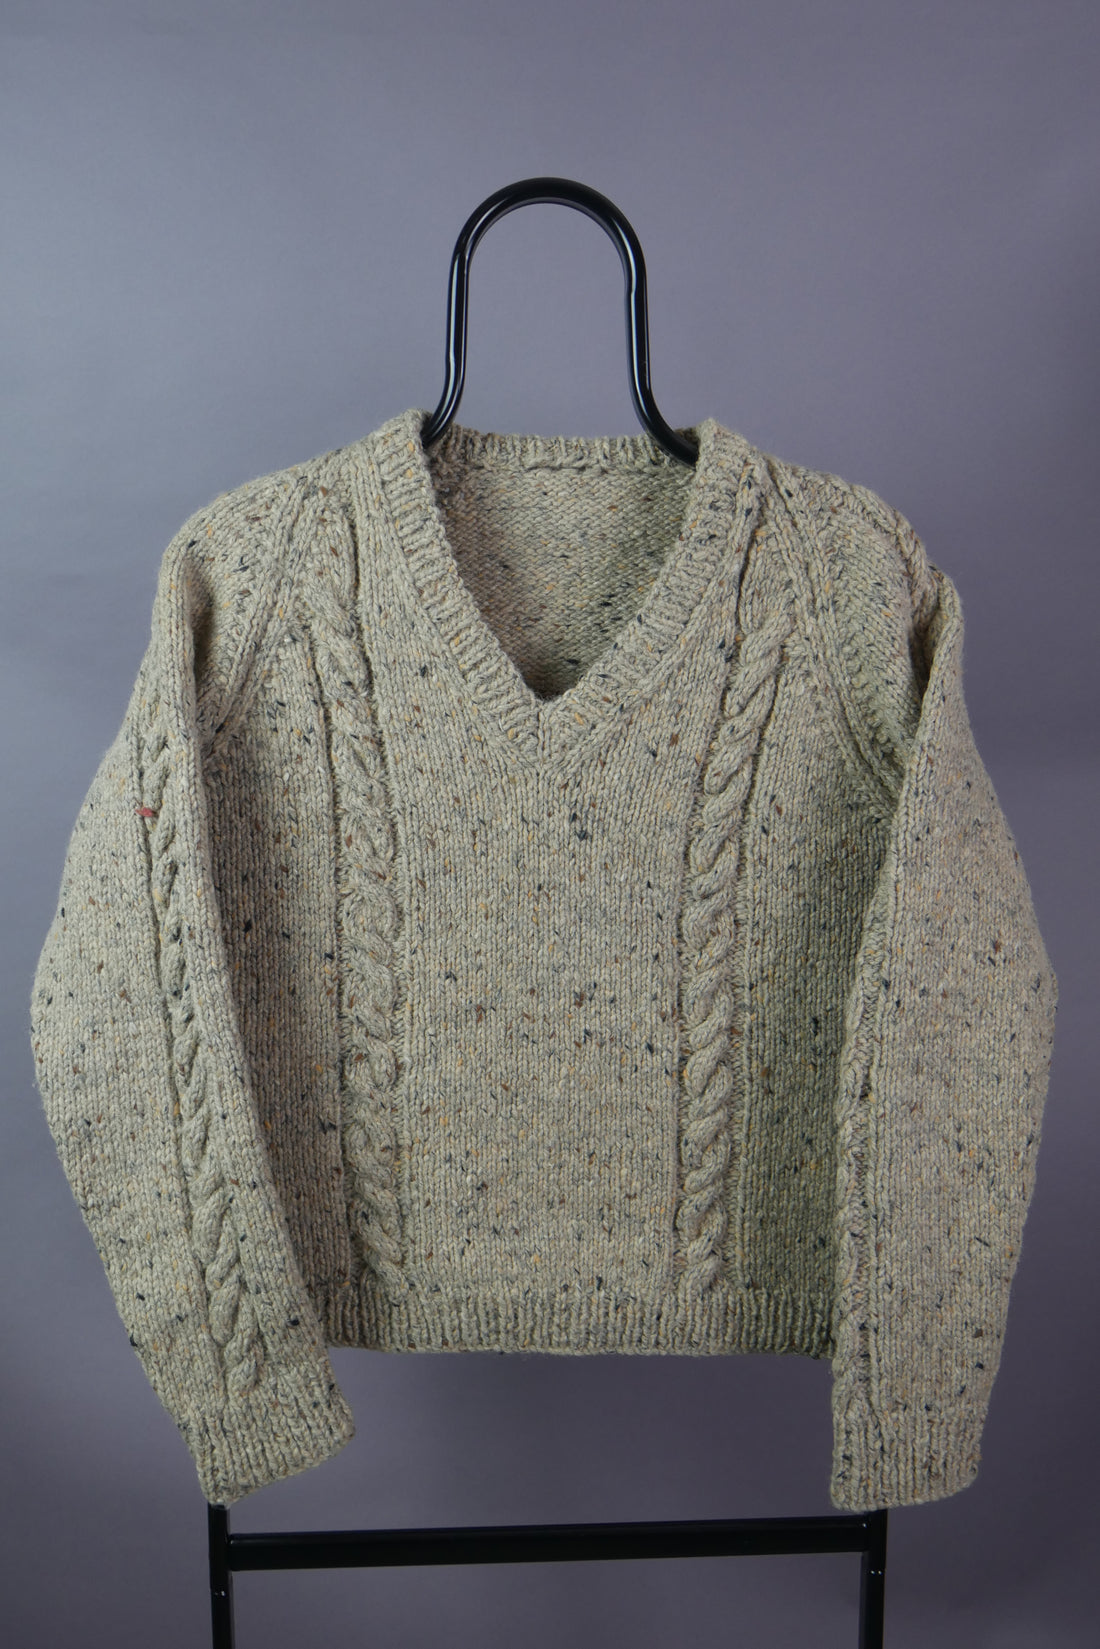 the Vintage Hand Knitted V Neck Jumper (Women's XS)